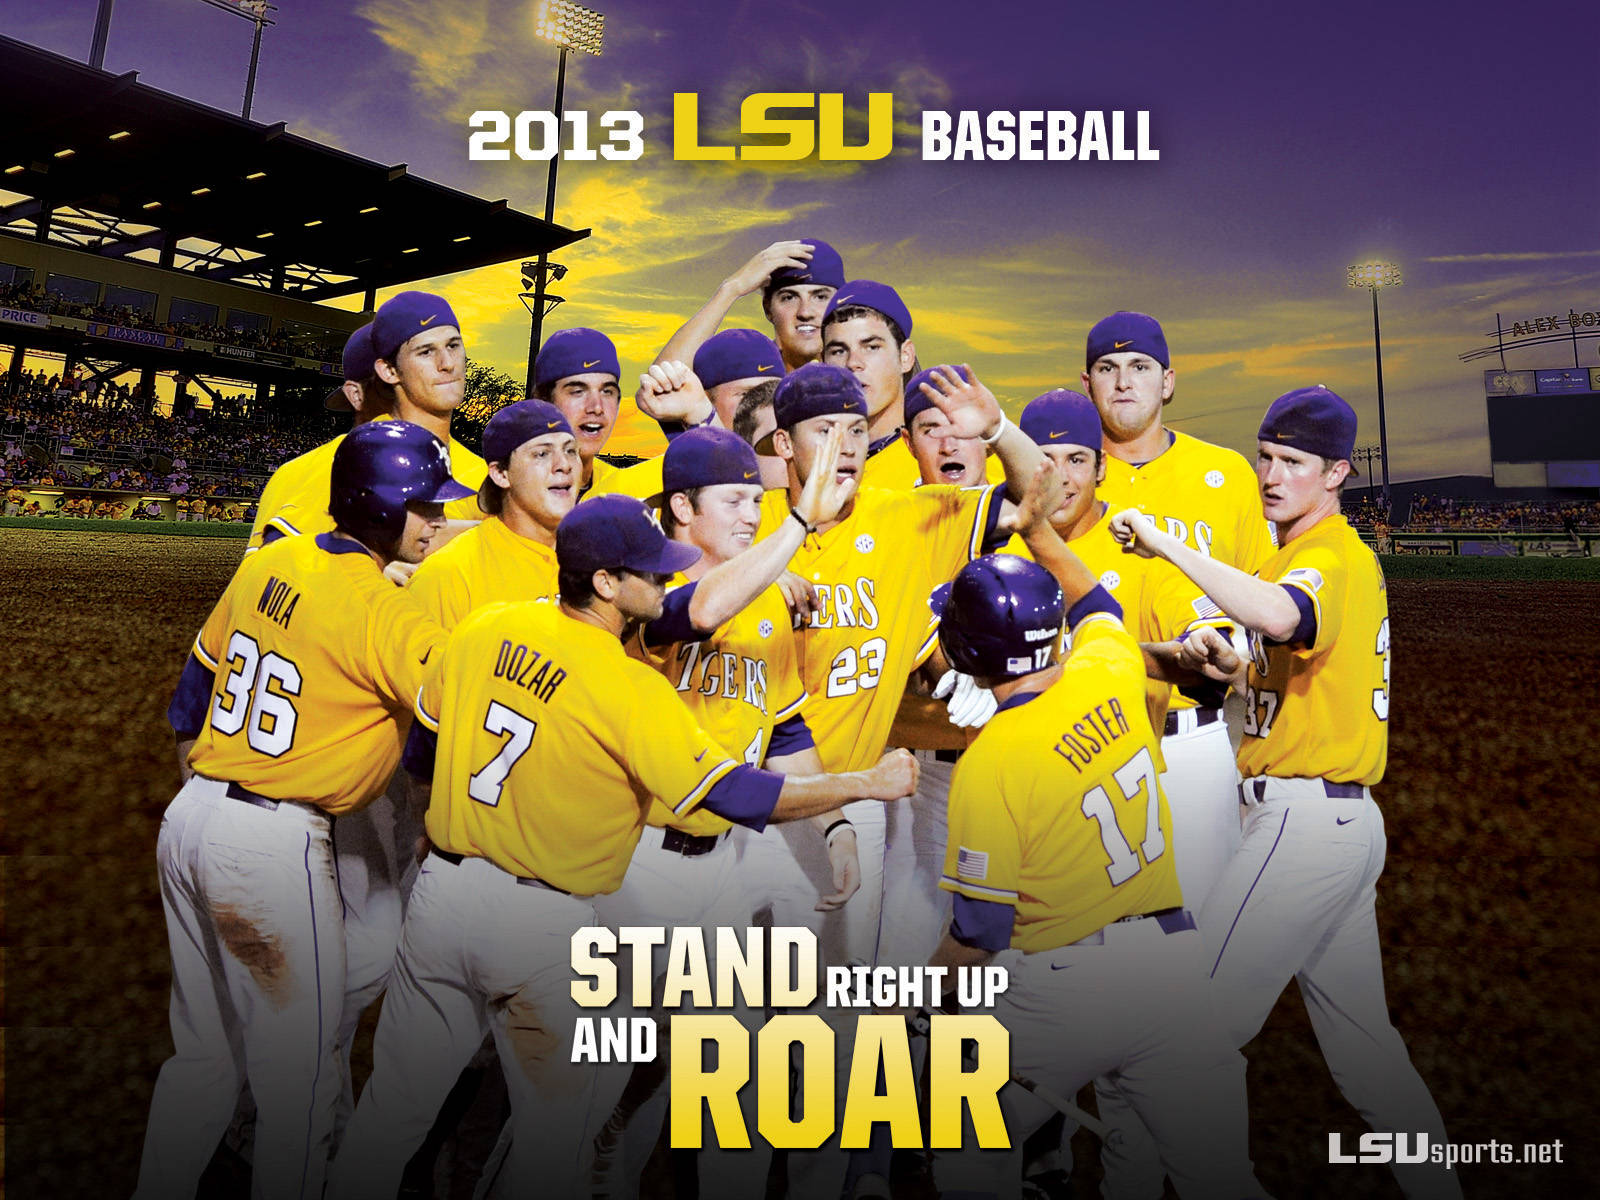 Free download LSU baseball iphone wallpapers [1024x576] for your